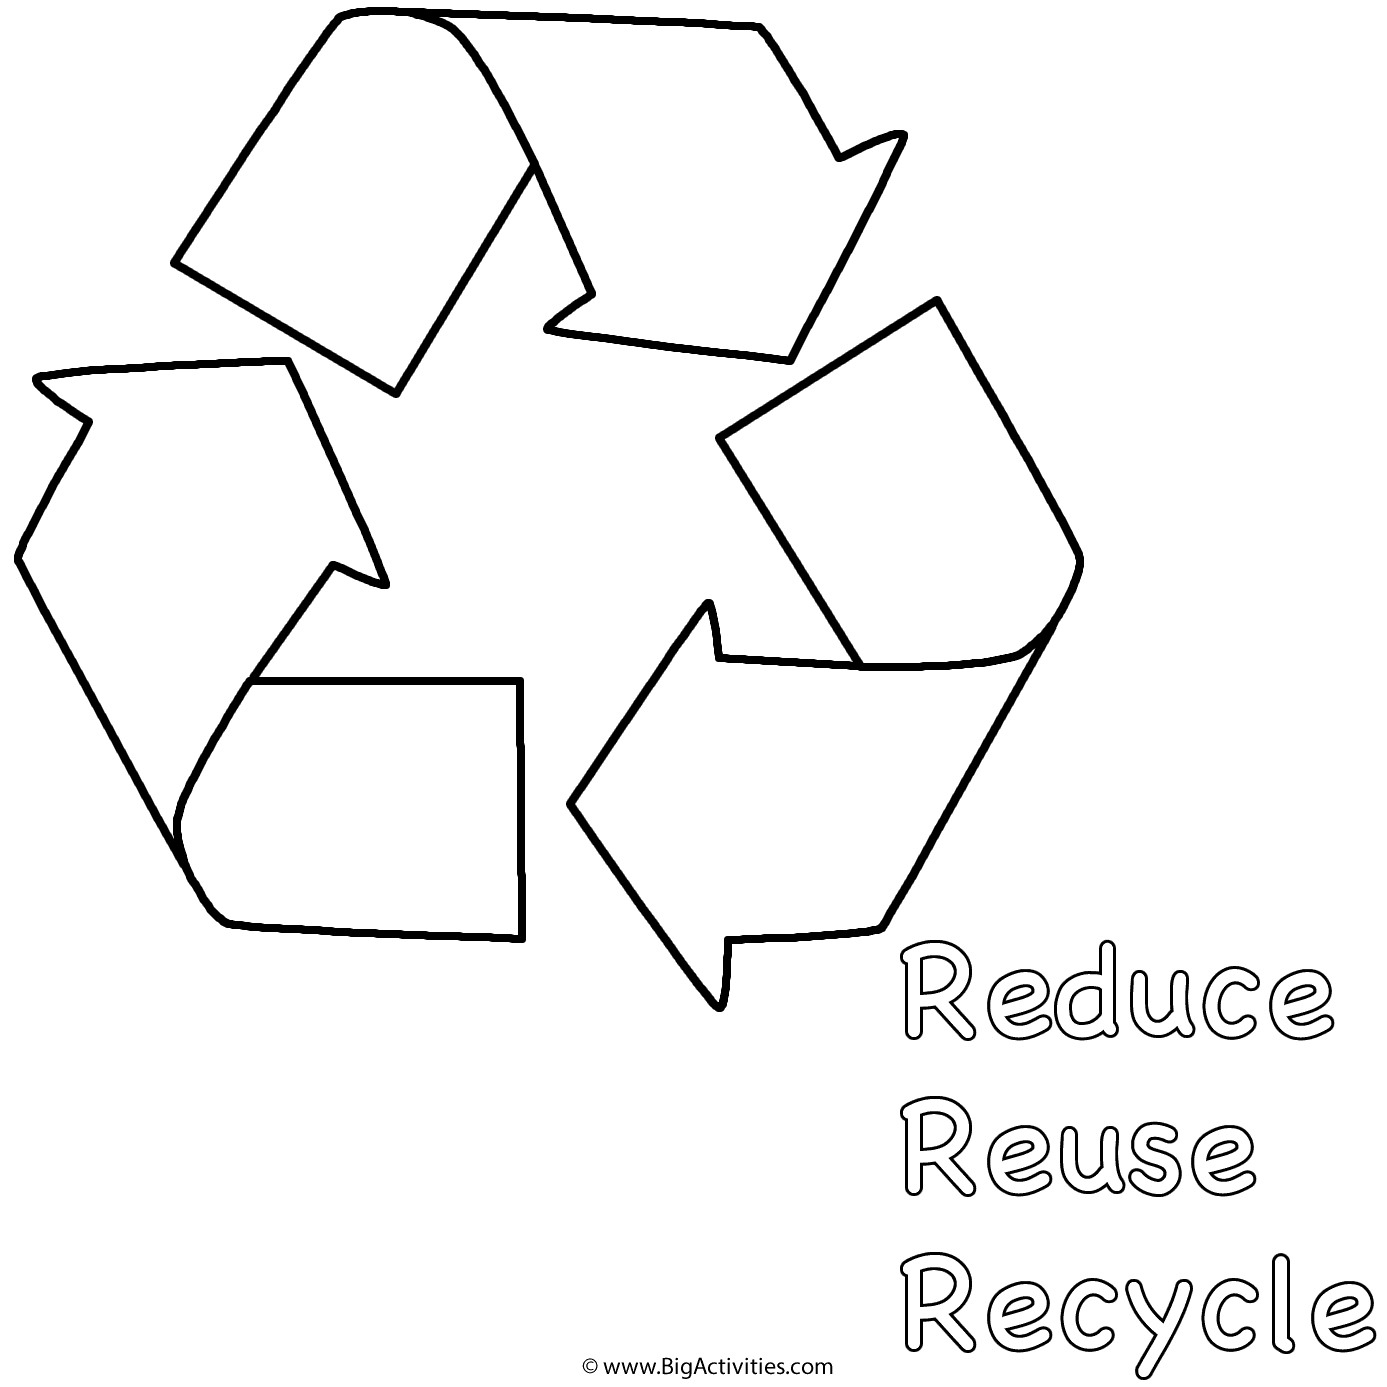 Reduce, Reuse, Recycle | Templates | Stencil